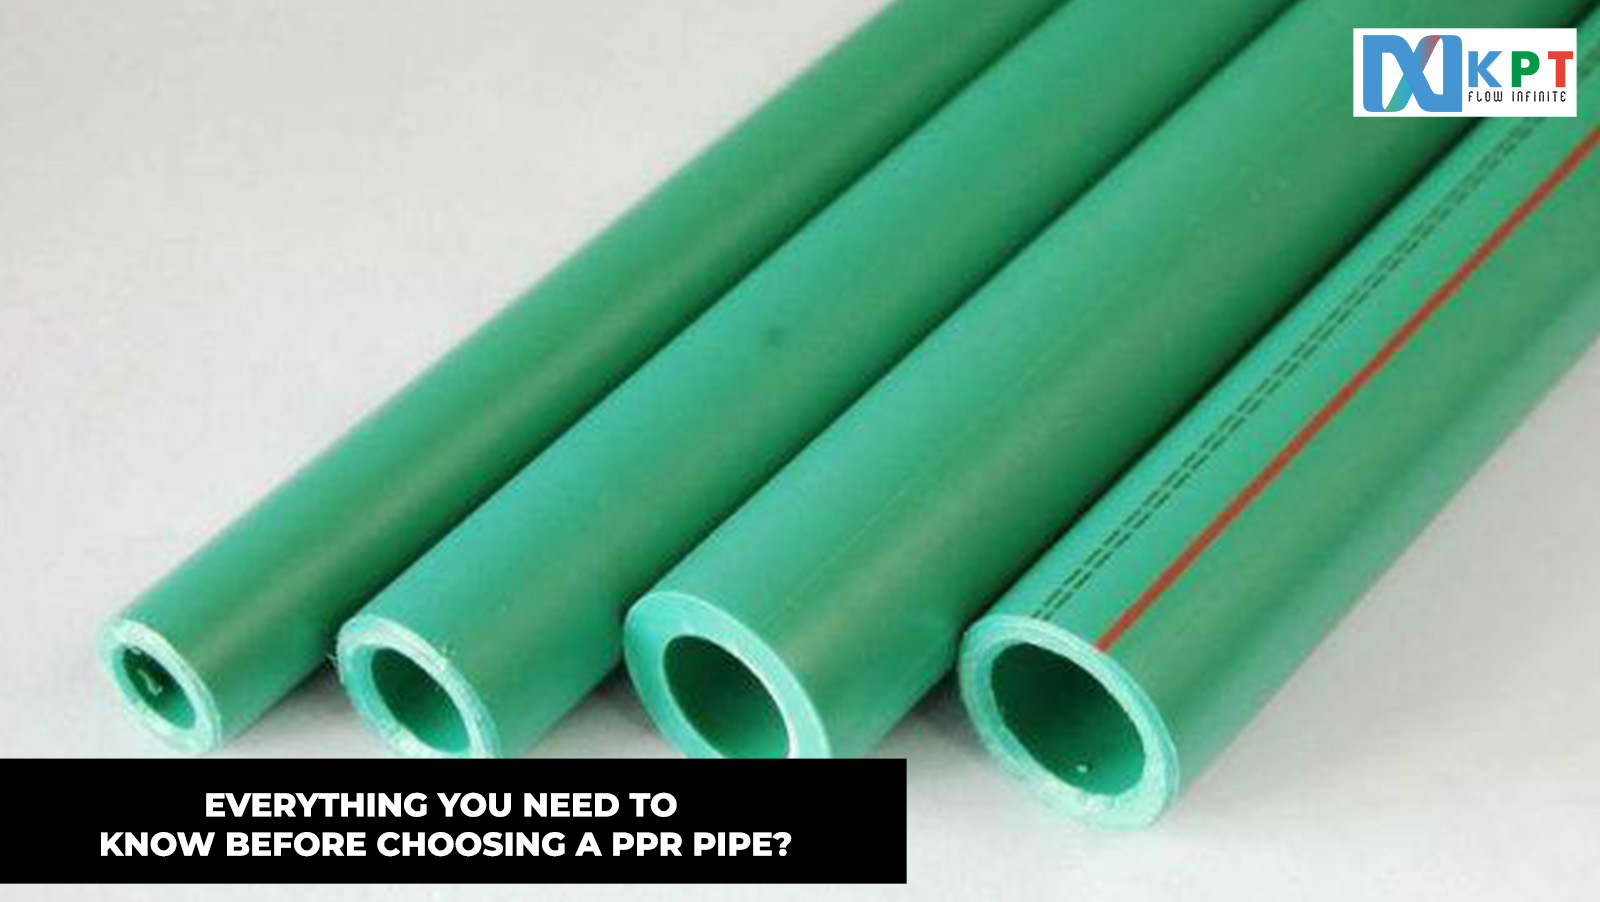 Everything You Need to Know Before Choosing a PPR Pipe?